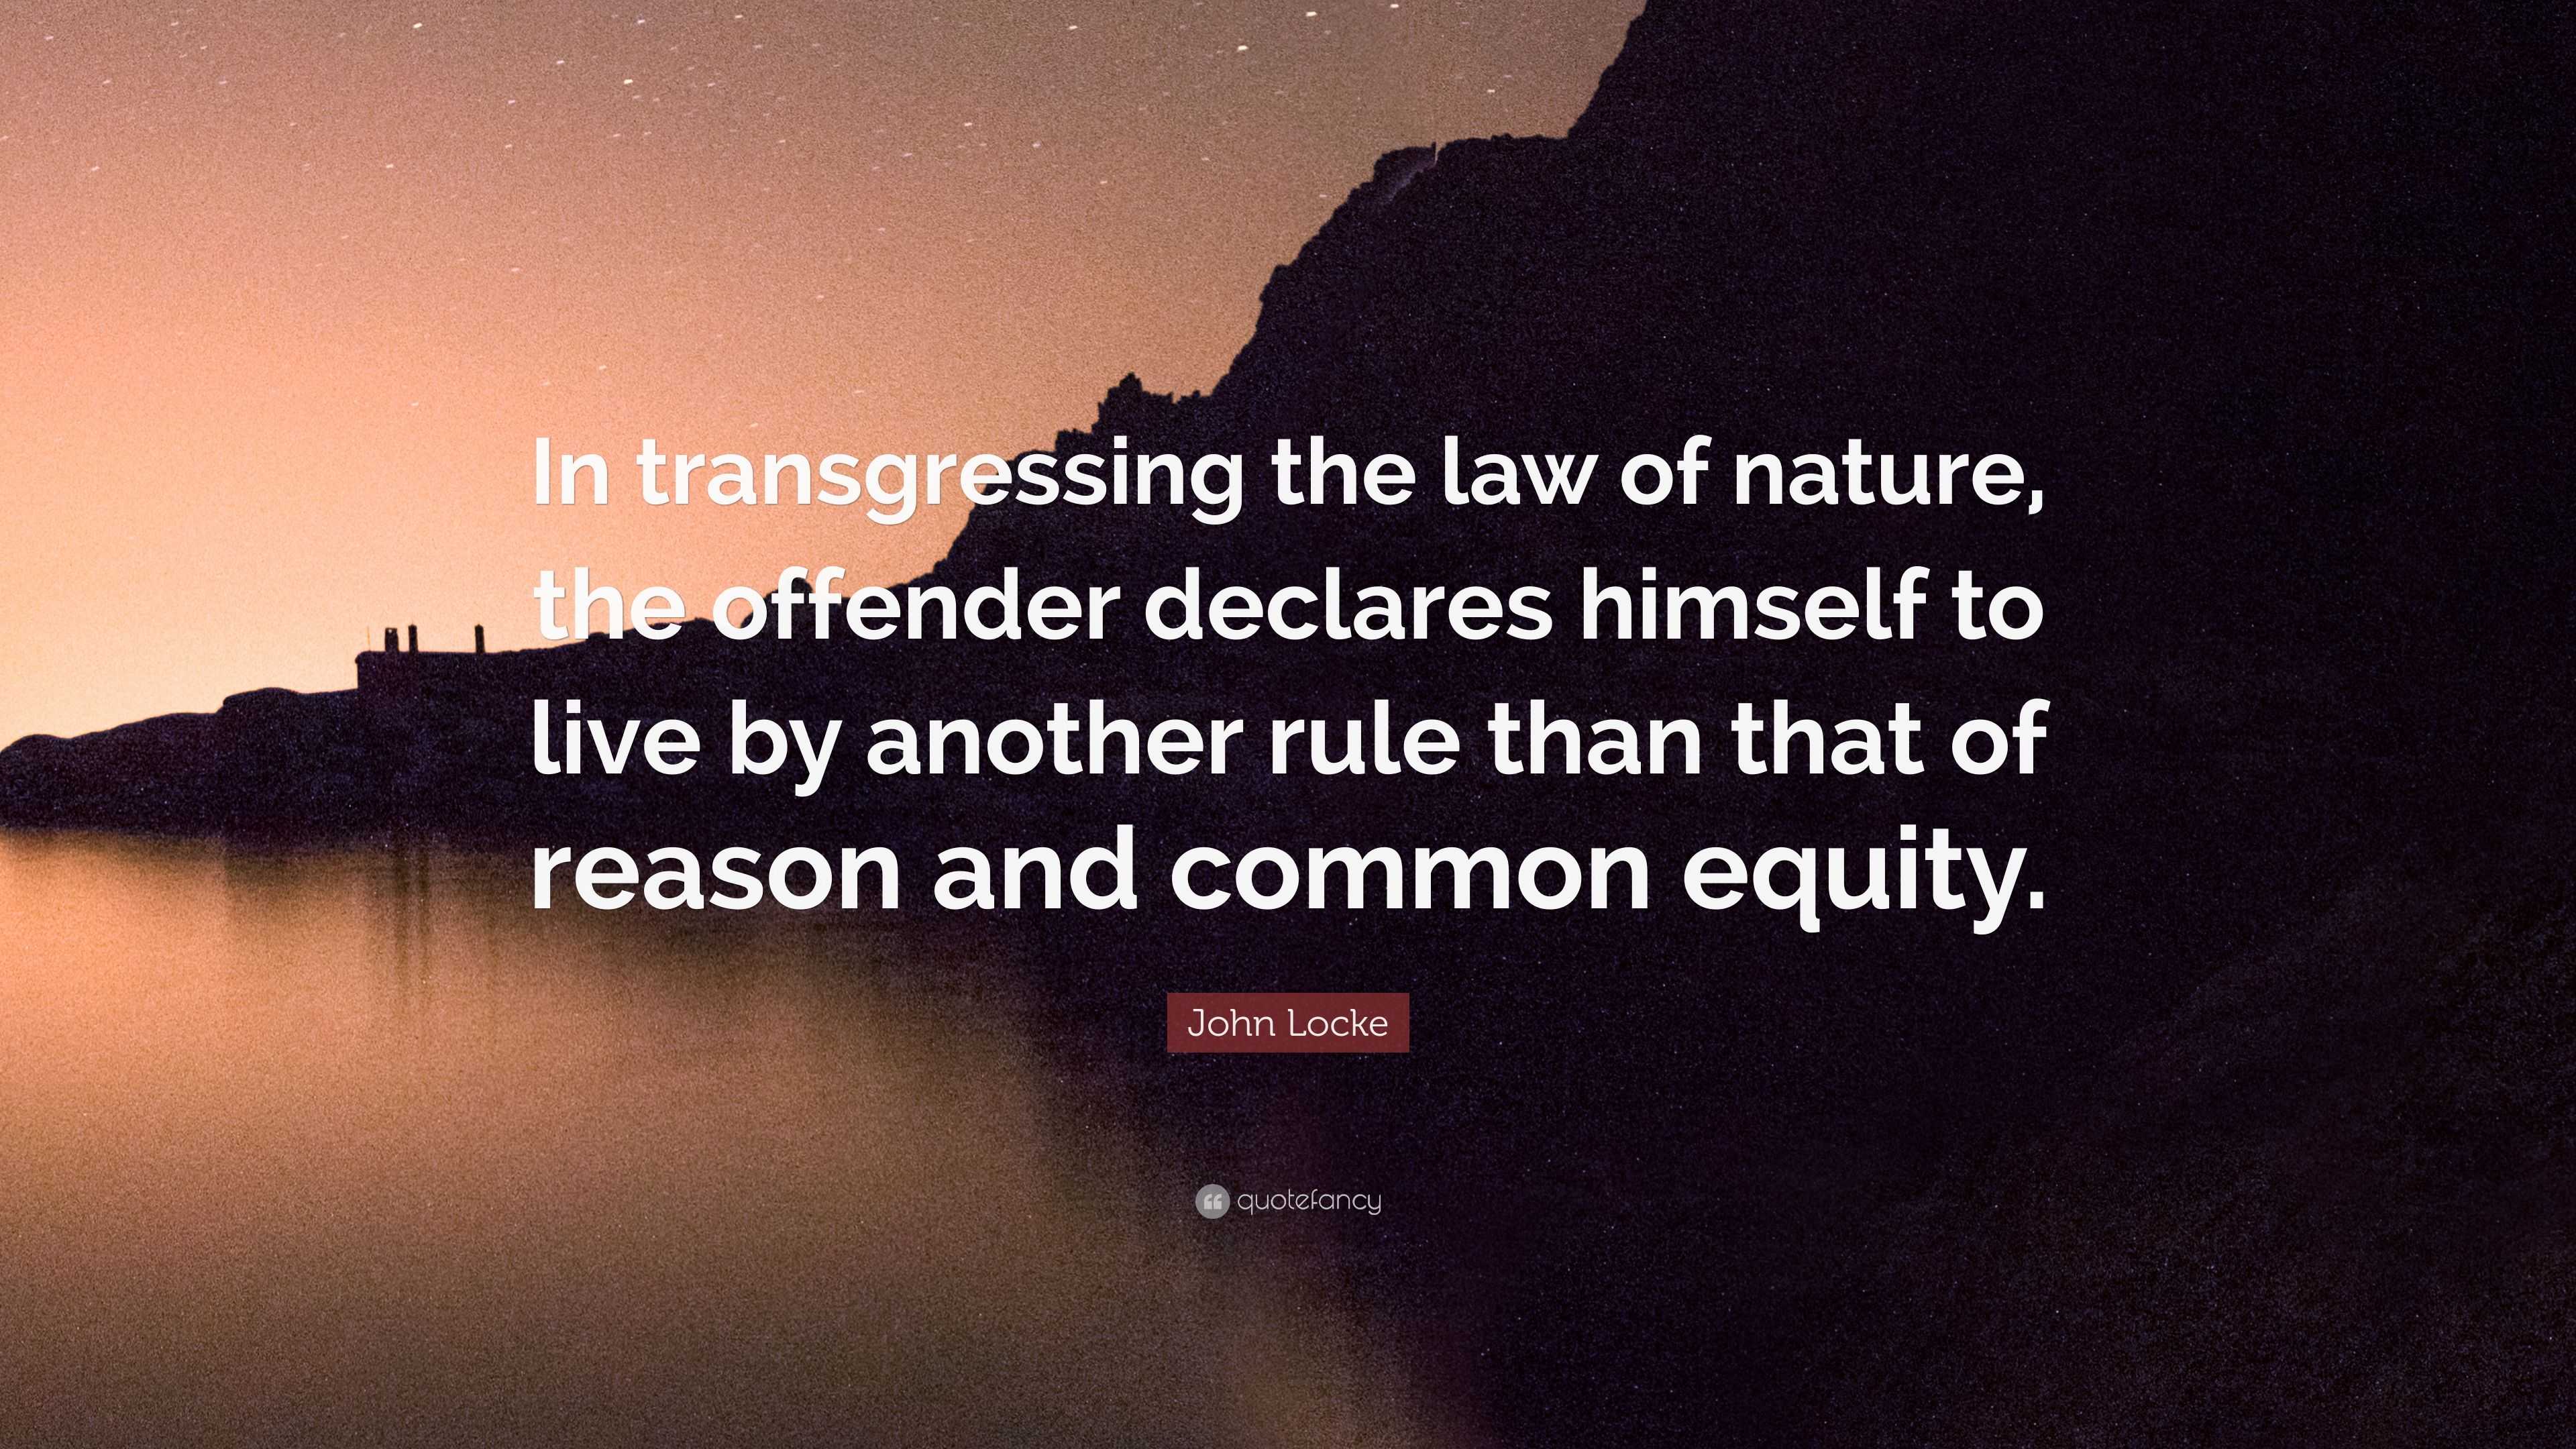 John Locke Quote: “In the law nature, the declares himself to live by another rule than that of reason and common...”